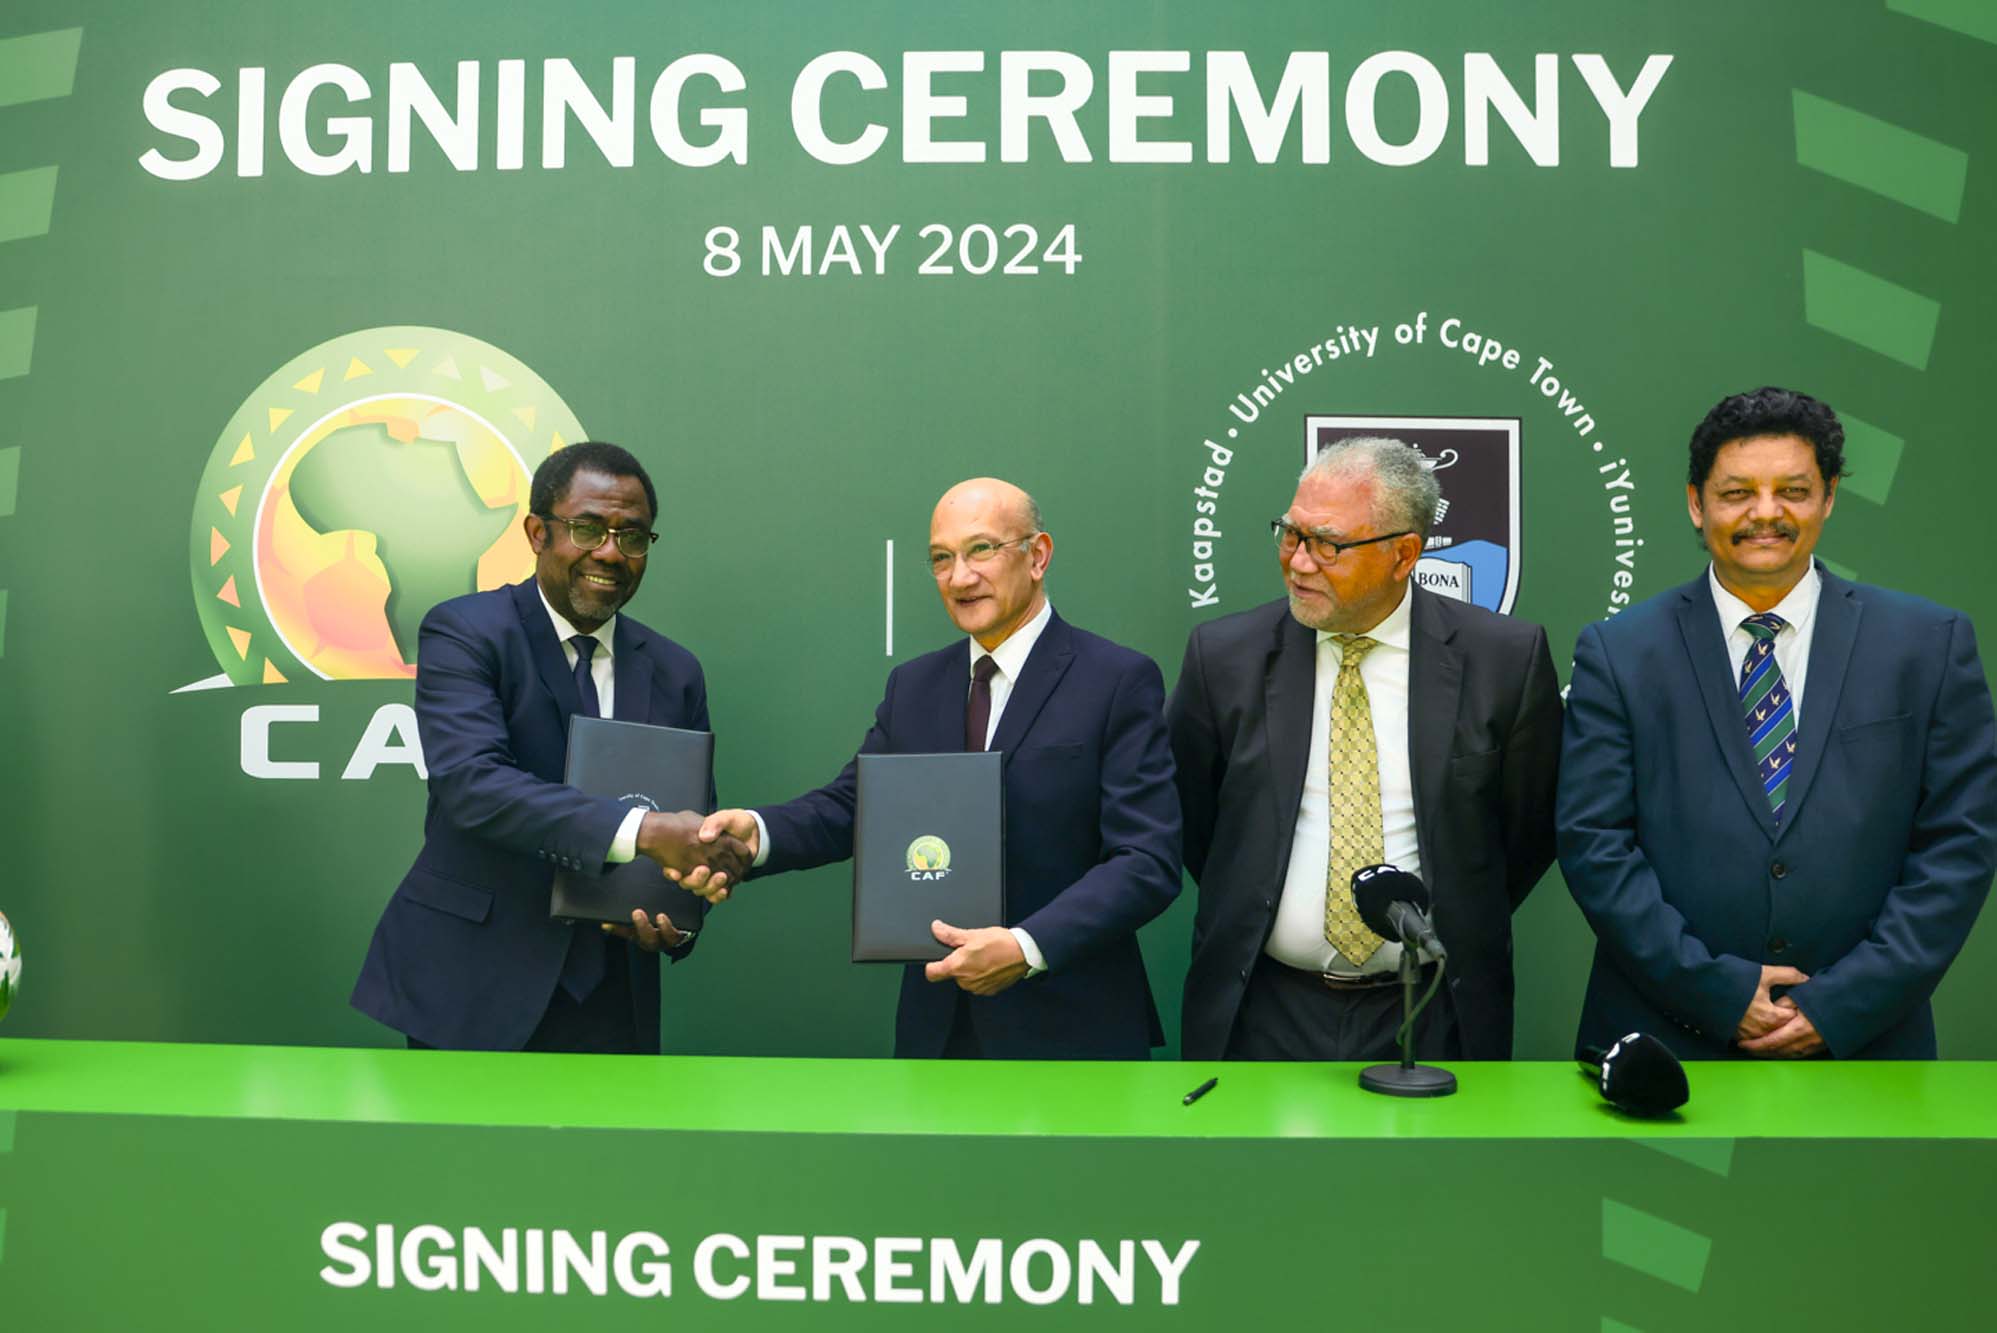 CAF Secretary General, Mr Veron Mosengo-Omba, and University of Cape Town (UCT) Vice-Chancellor interim, Professor Daya Reddy, shaking hands after signing the MoU.